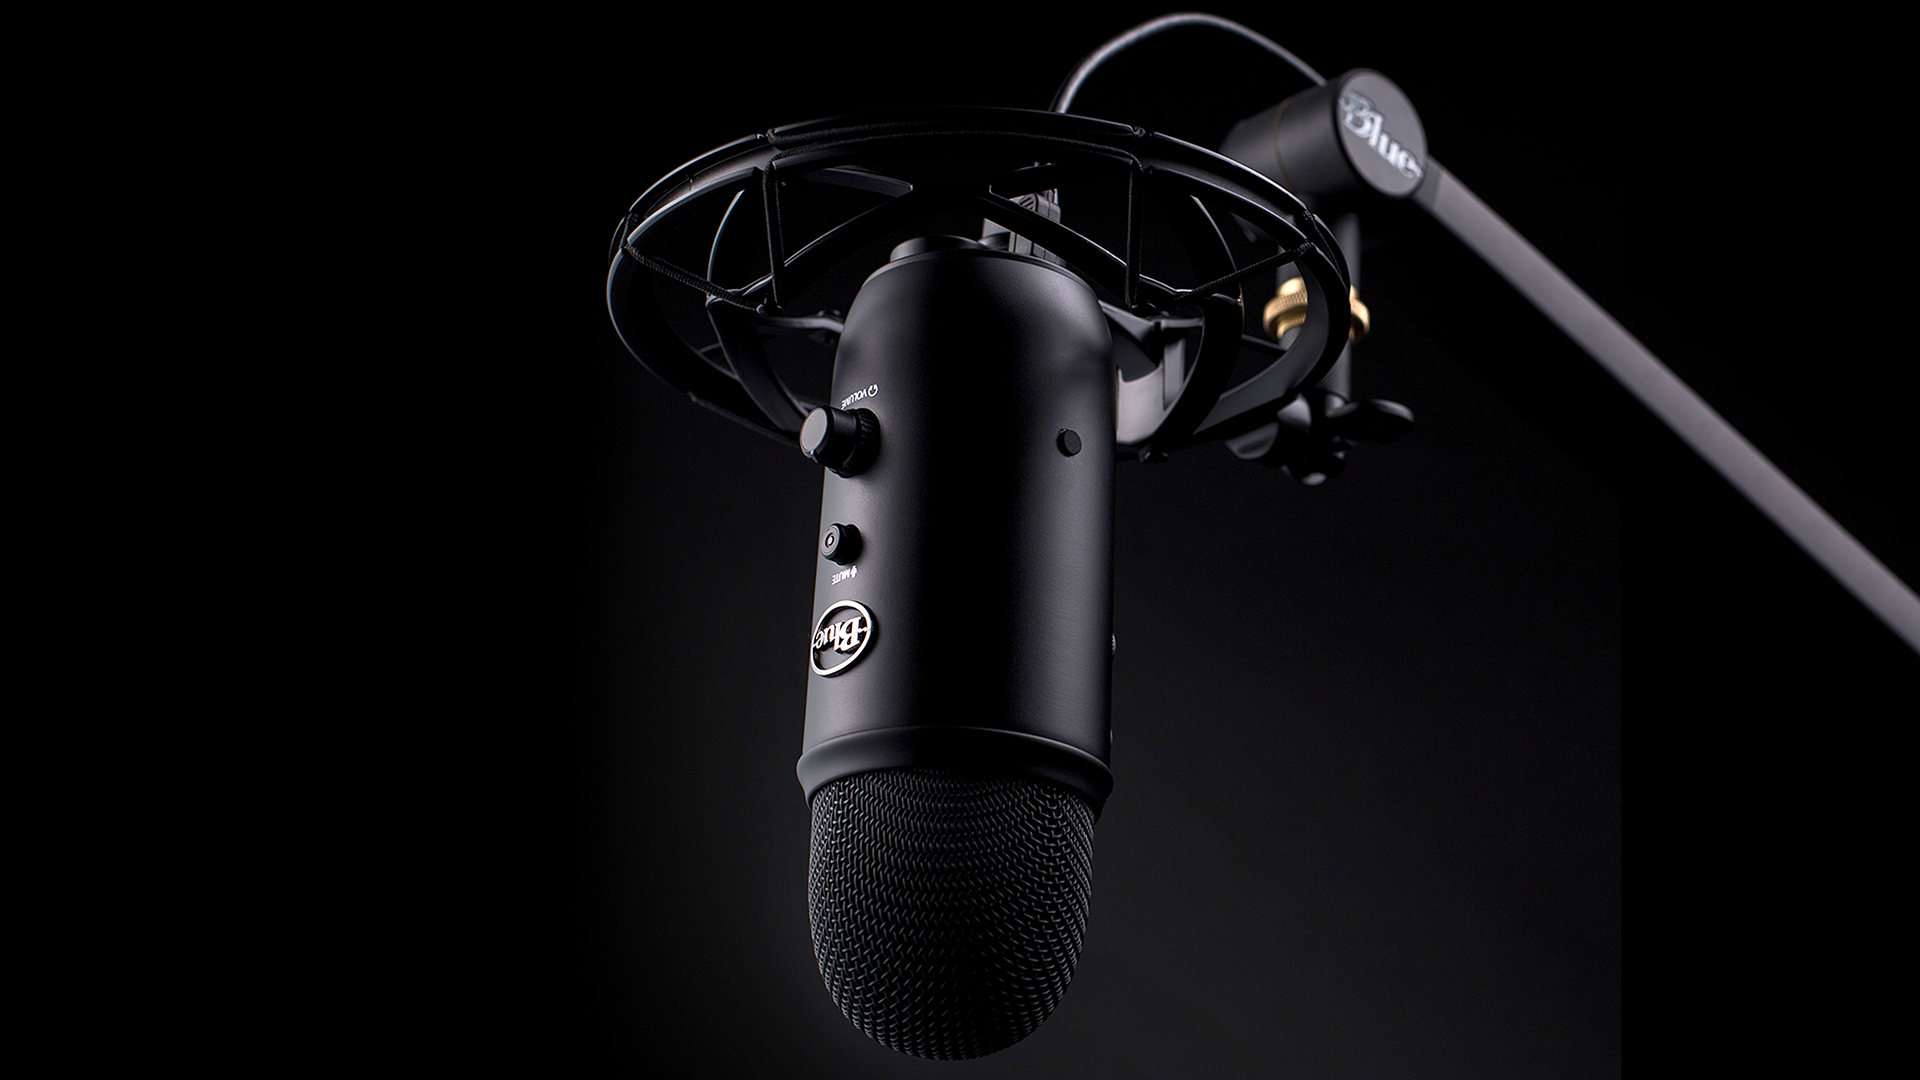 Best Microphones for youtube videos in 2021